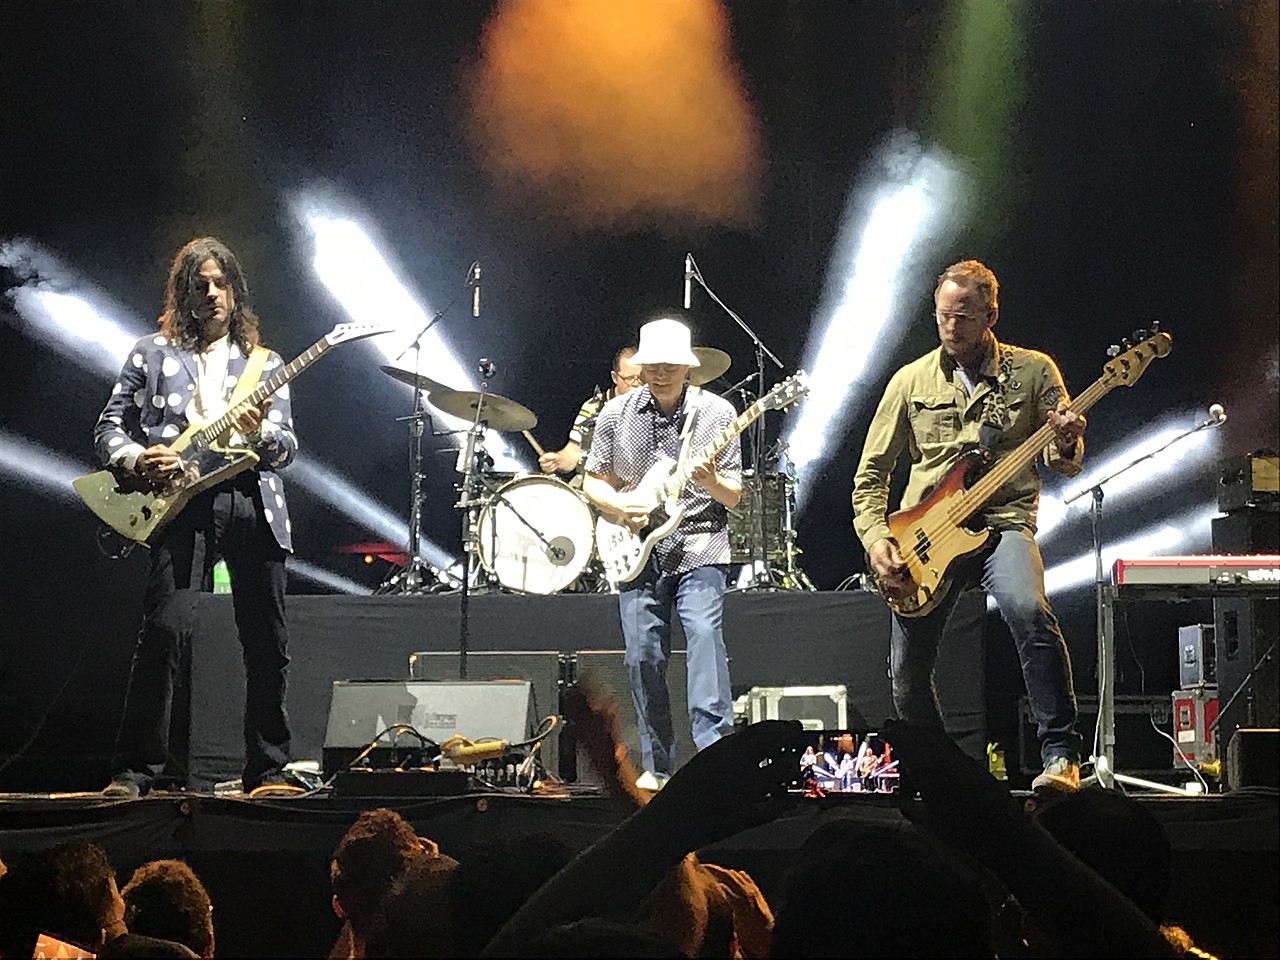 Weezer performing in 2019 at Musikfest in Bethlehem, Pennsylvania. From left to right: Brian Bell, Patrick Wilson, Rivers Cuomo, and Scott Shriner.